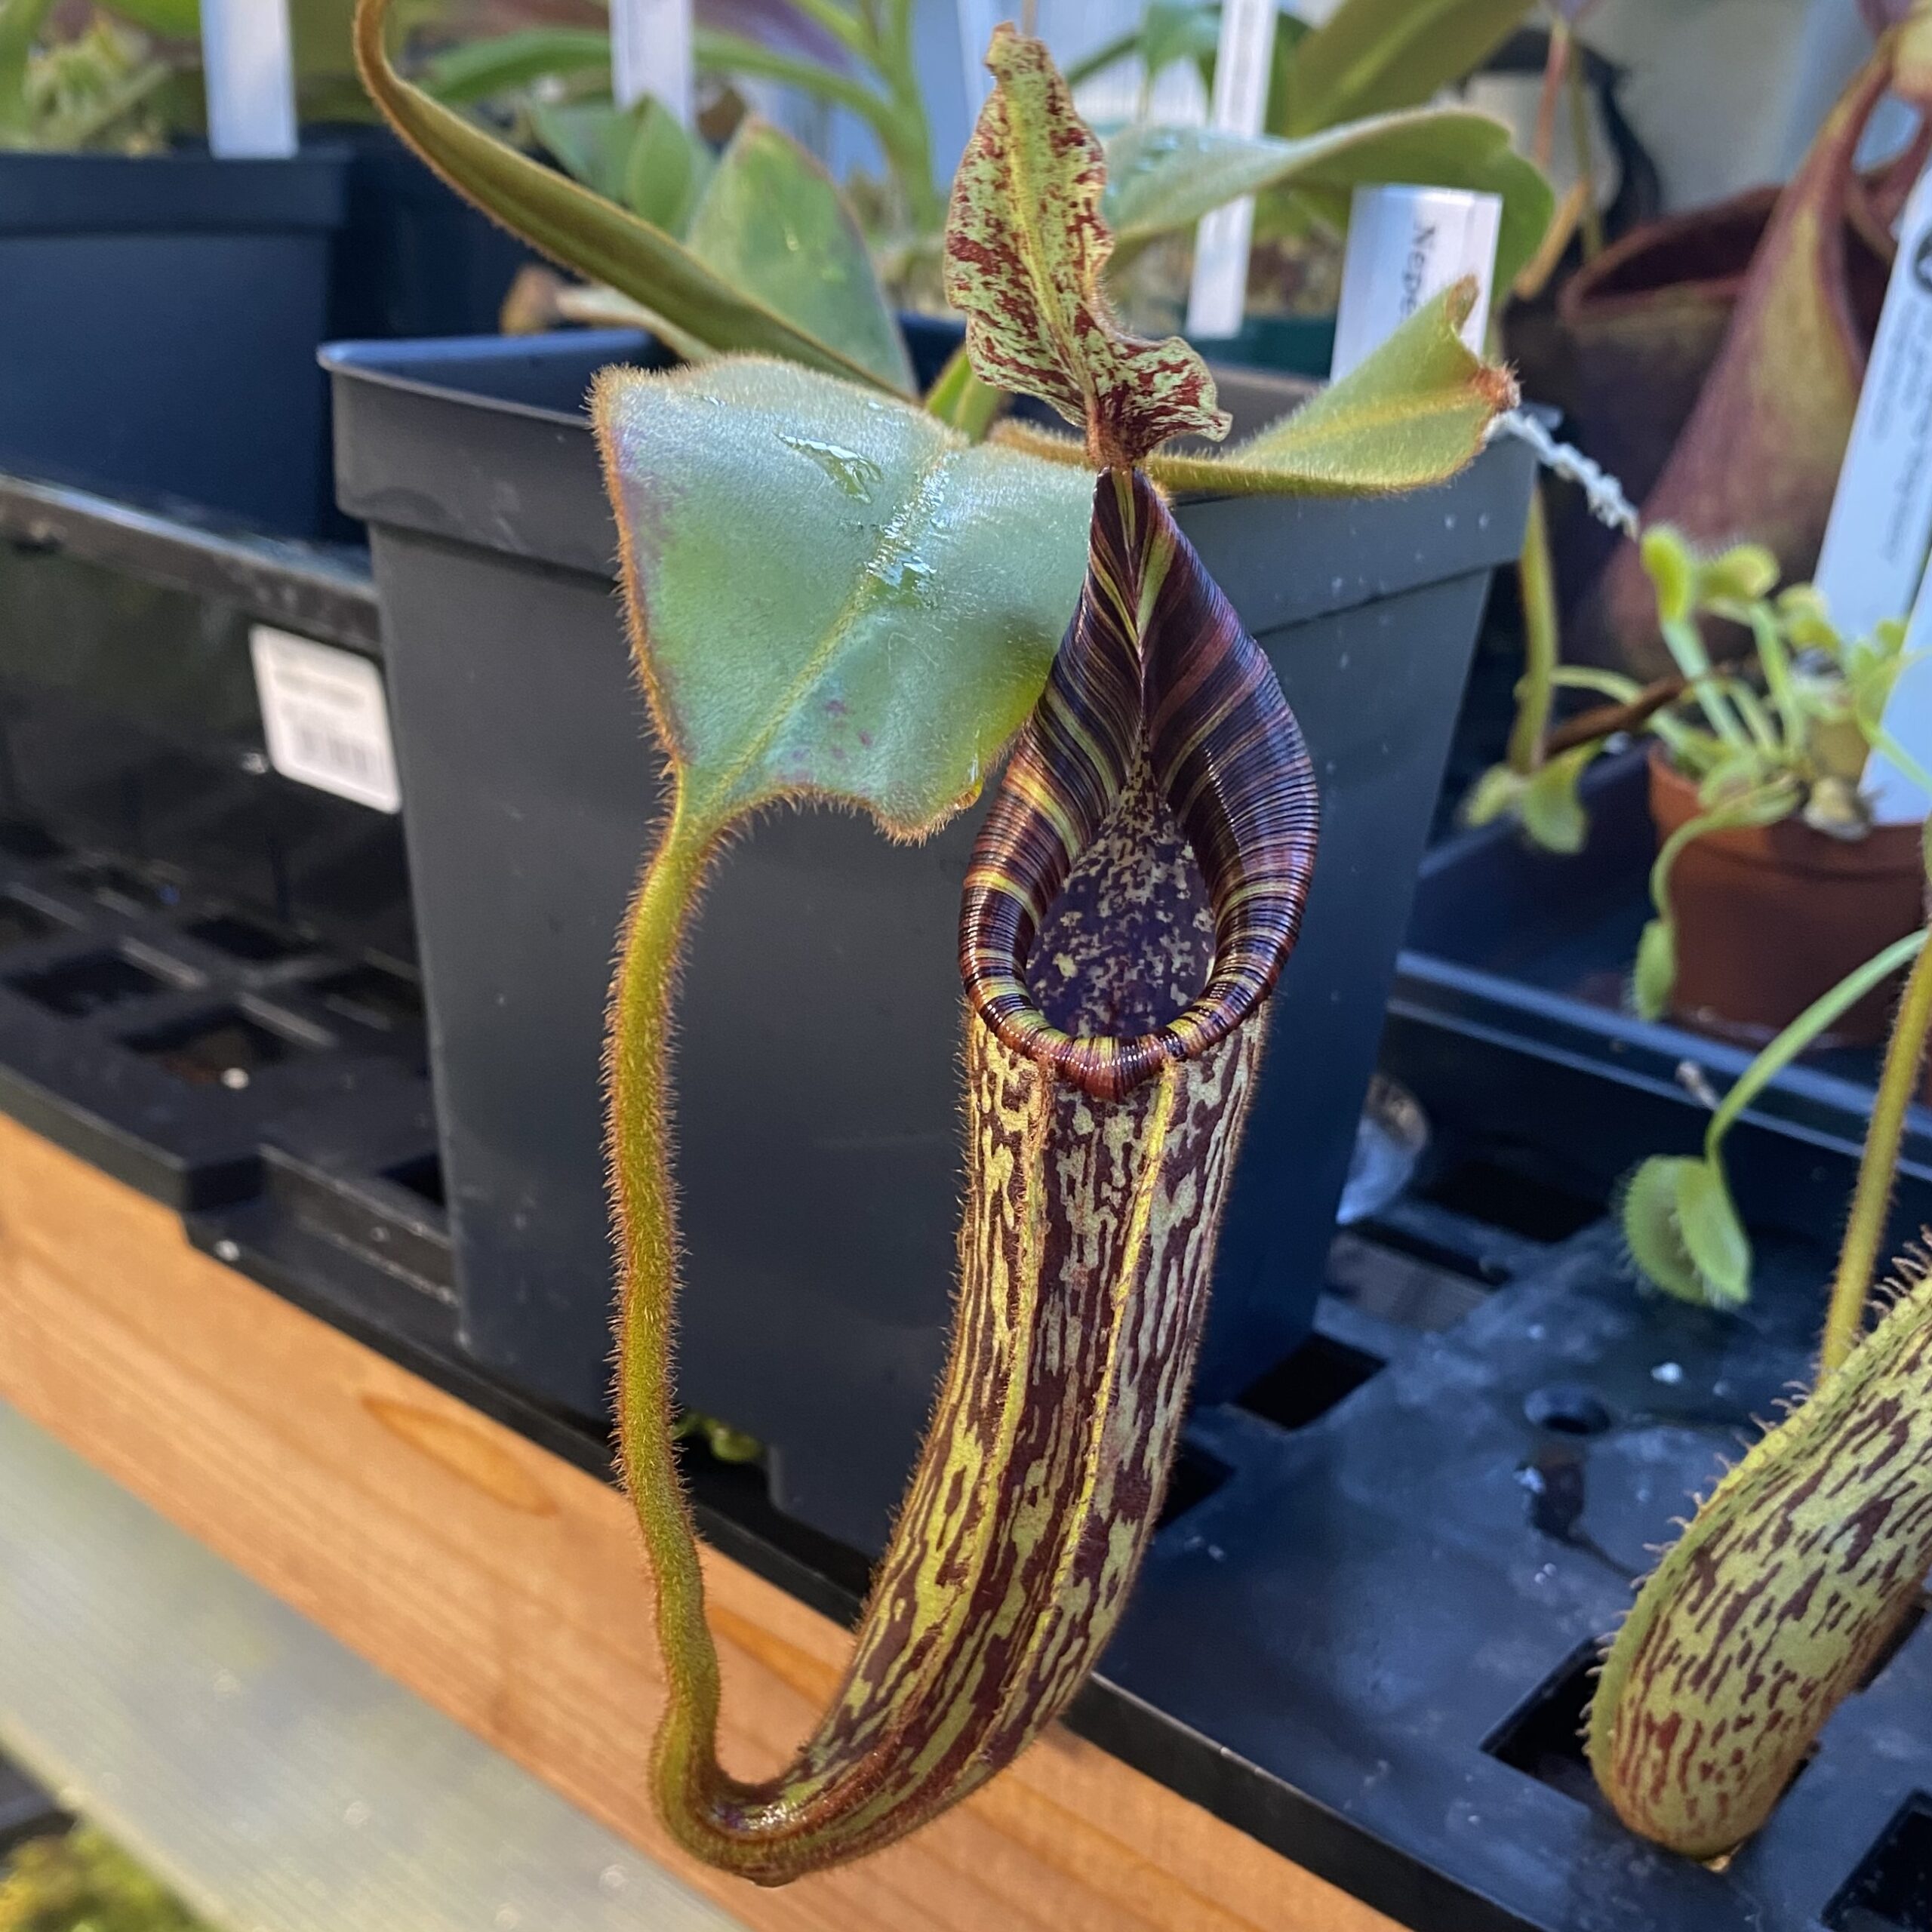 A Nepenthes platychila x mollis plant in a black container